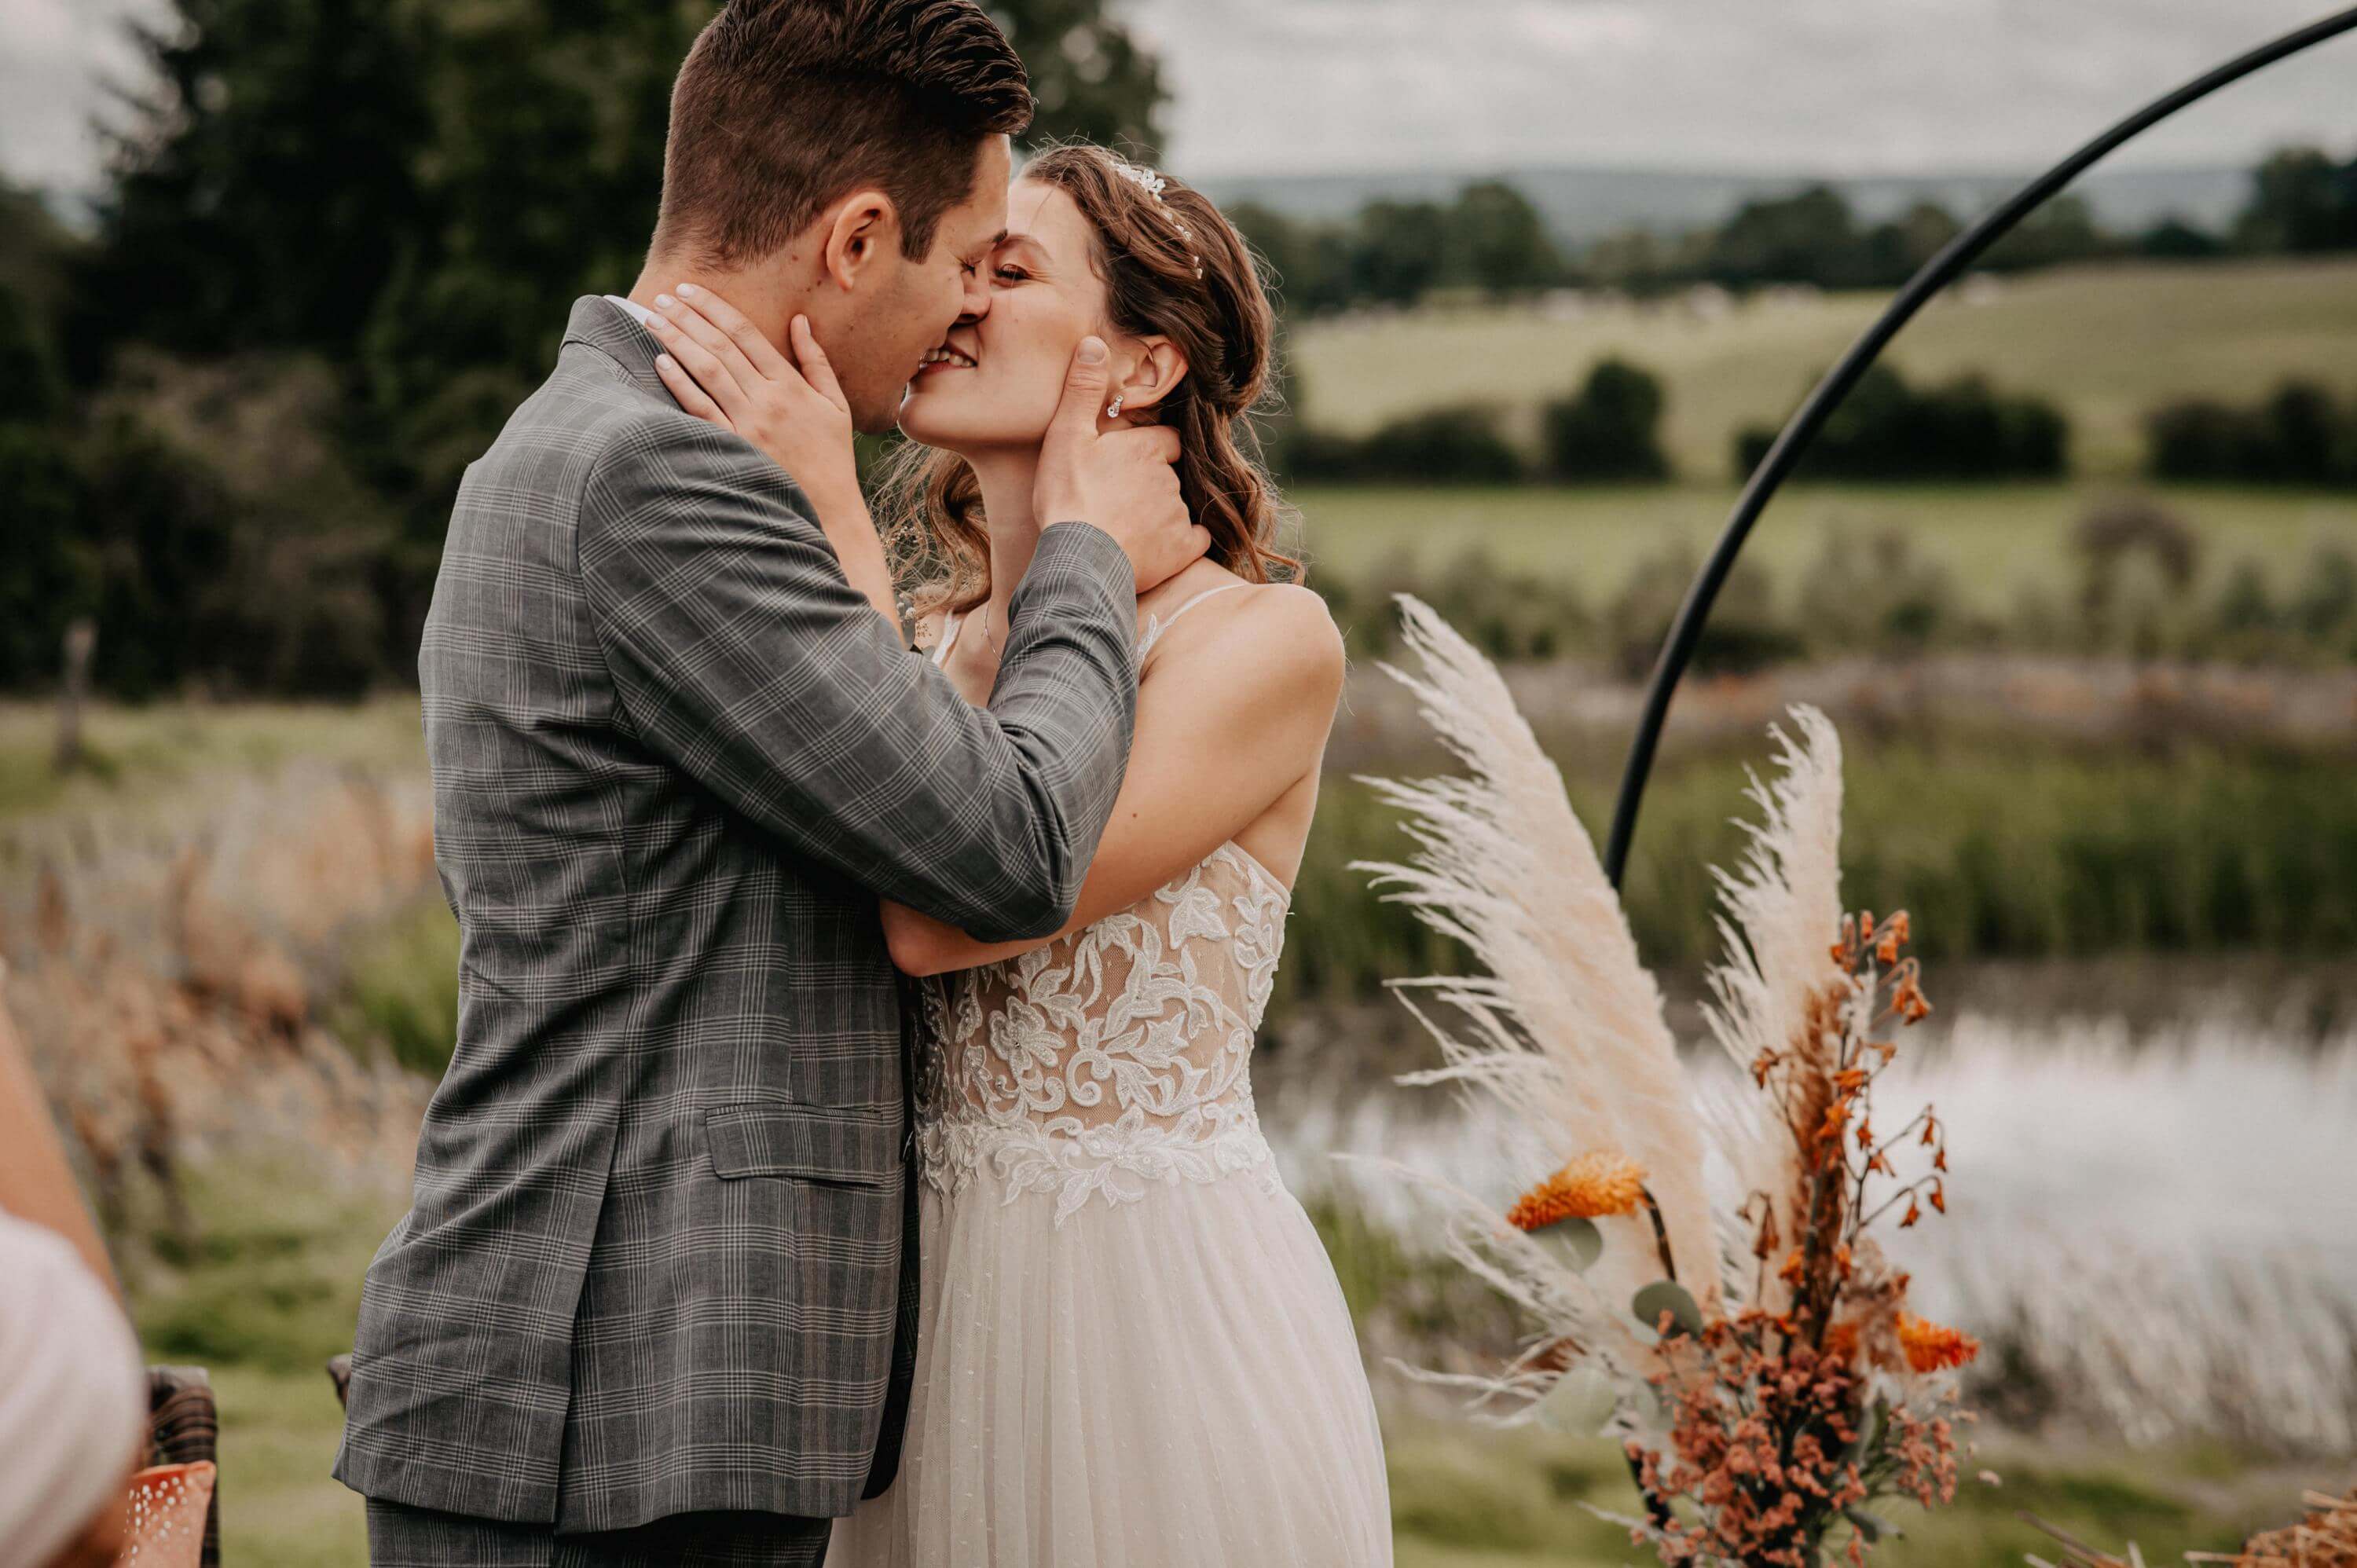 The close-up shows a wedding couple gently kissing with closed eyes at a boho-style outdoor wedding in front of a small lake and a large, round wedding arch.